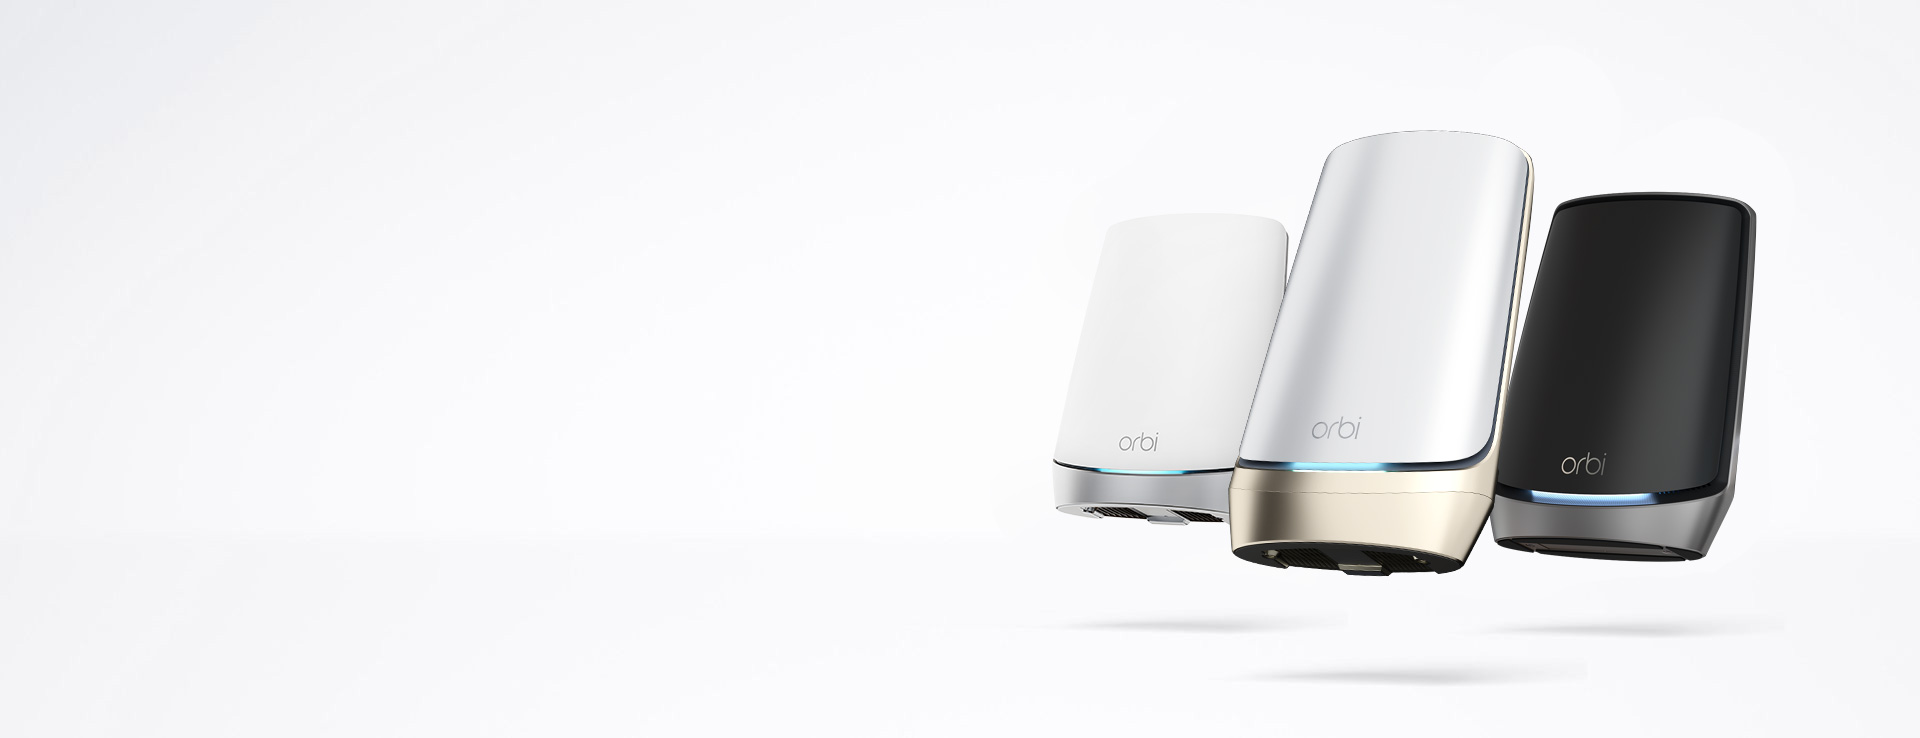 ORBI WHOLE-HOME MESH WIFI IN A CLASS OF ITS OWN